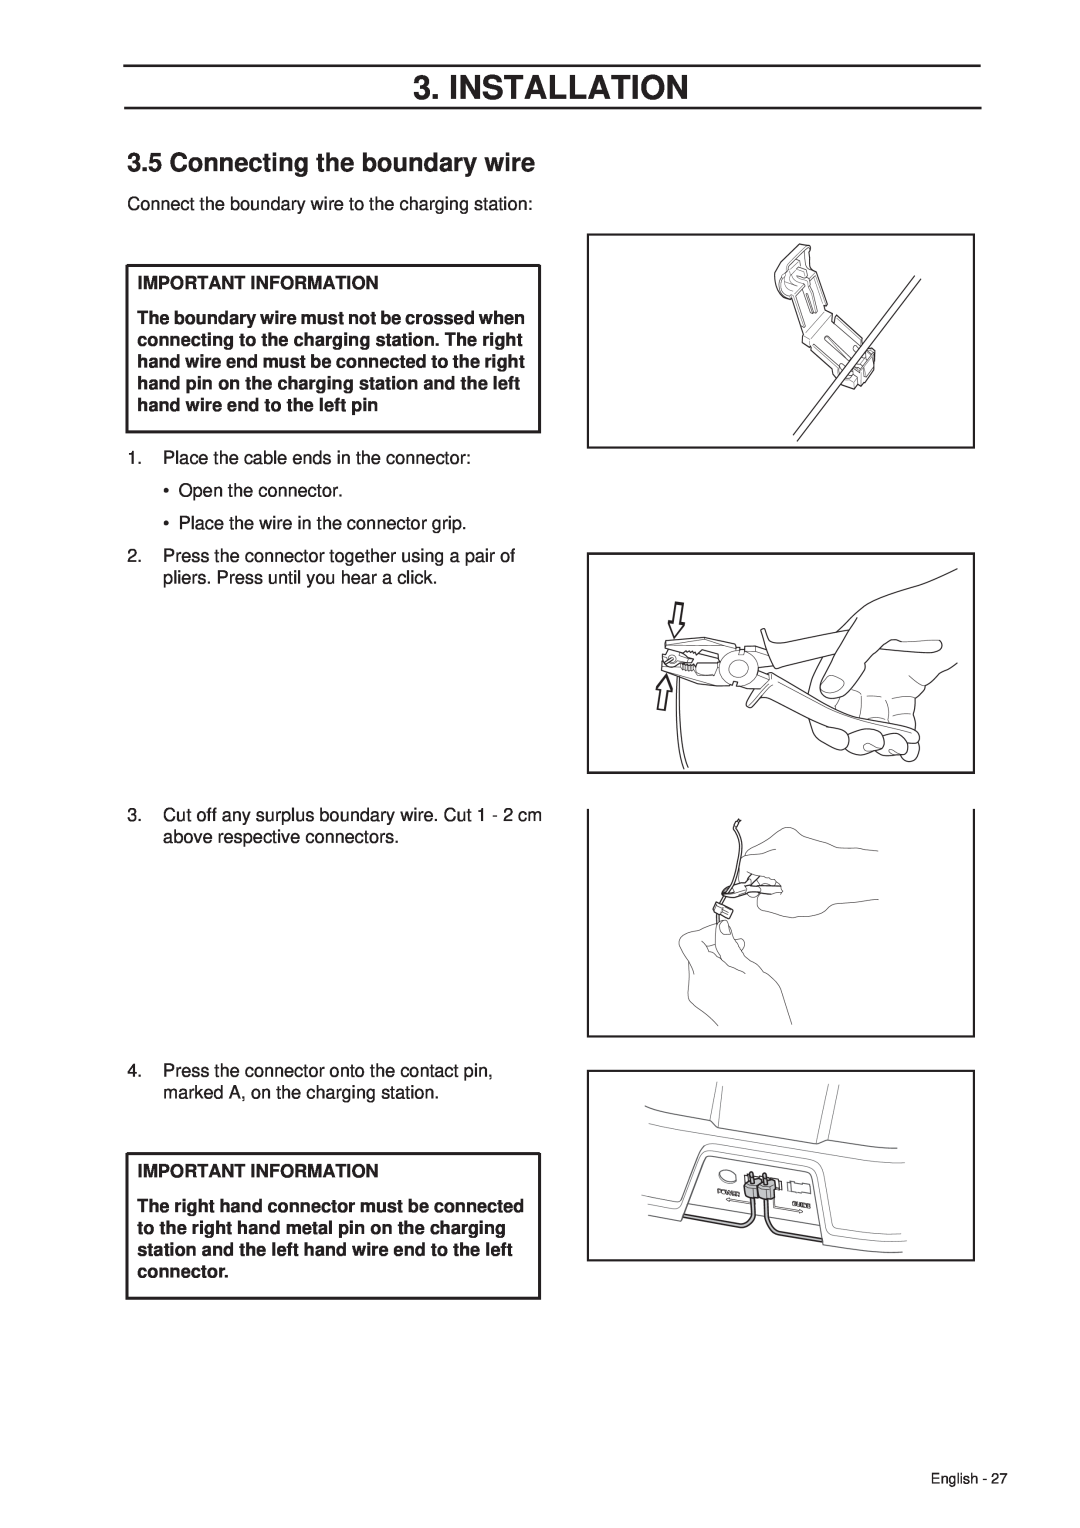 Husqvarna 305 manual 3.5Connecting the boundary wire, Installation, Important Information 